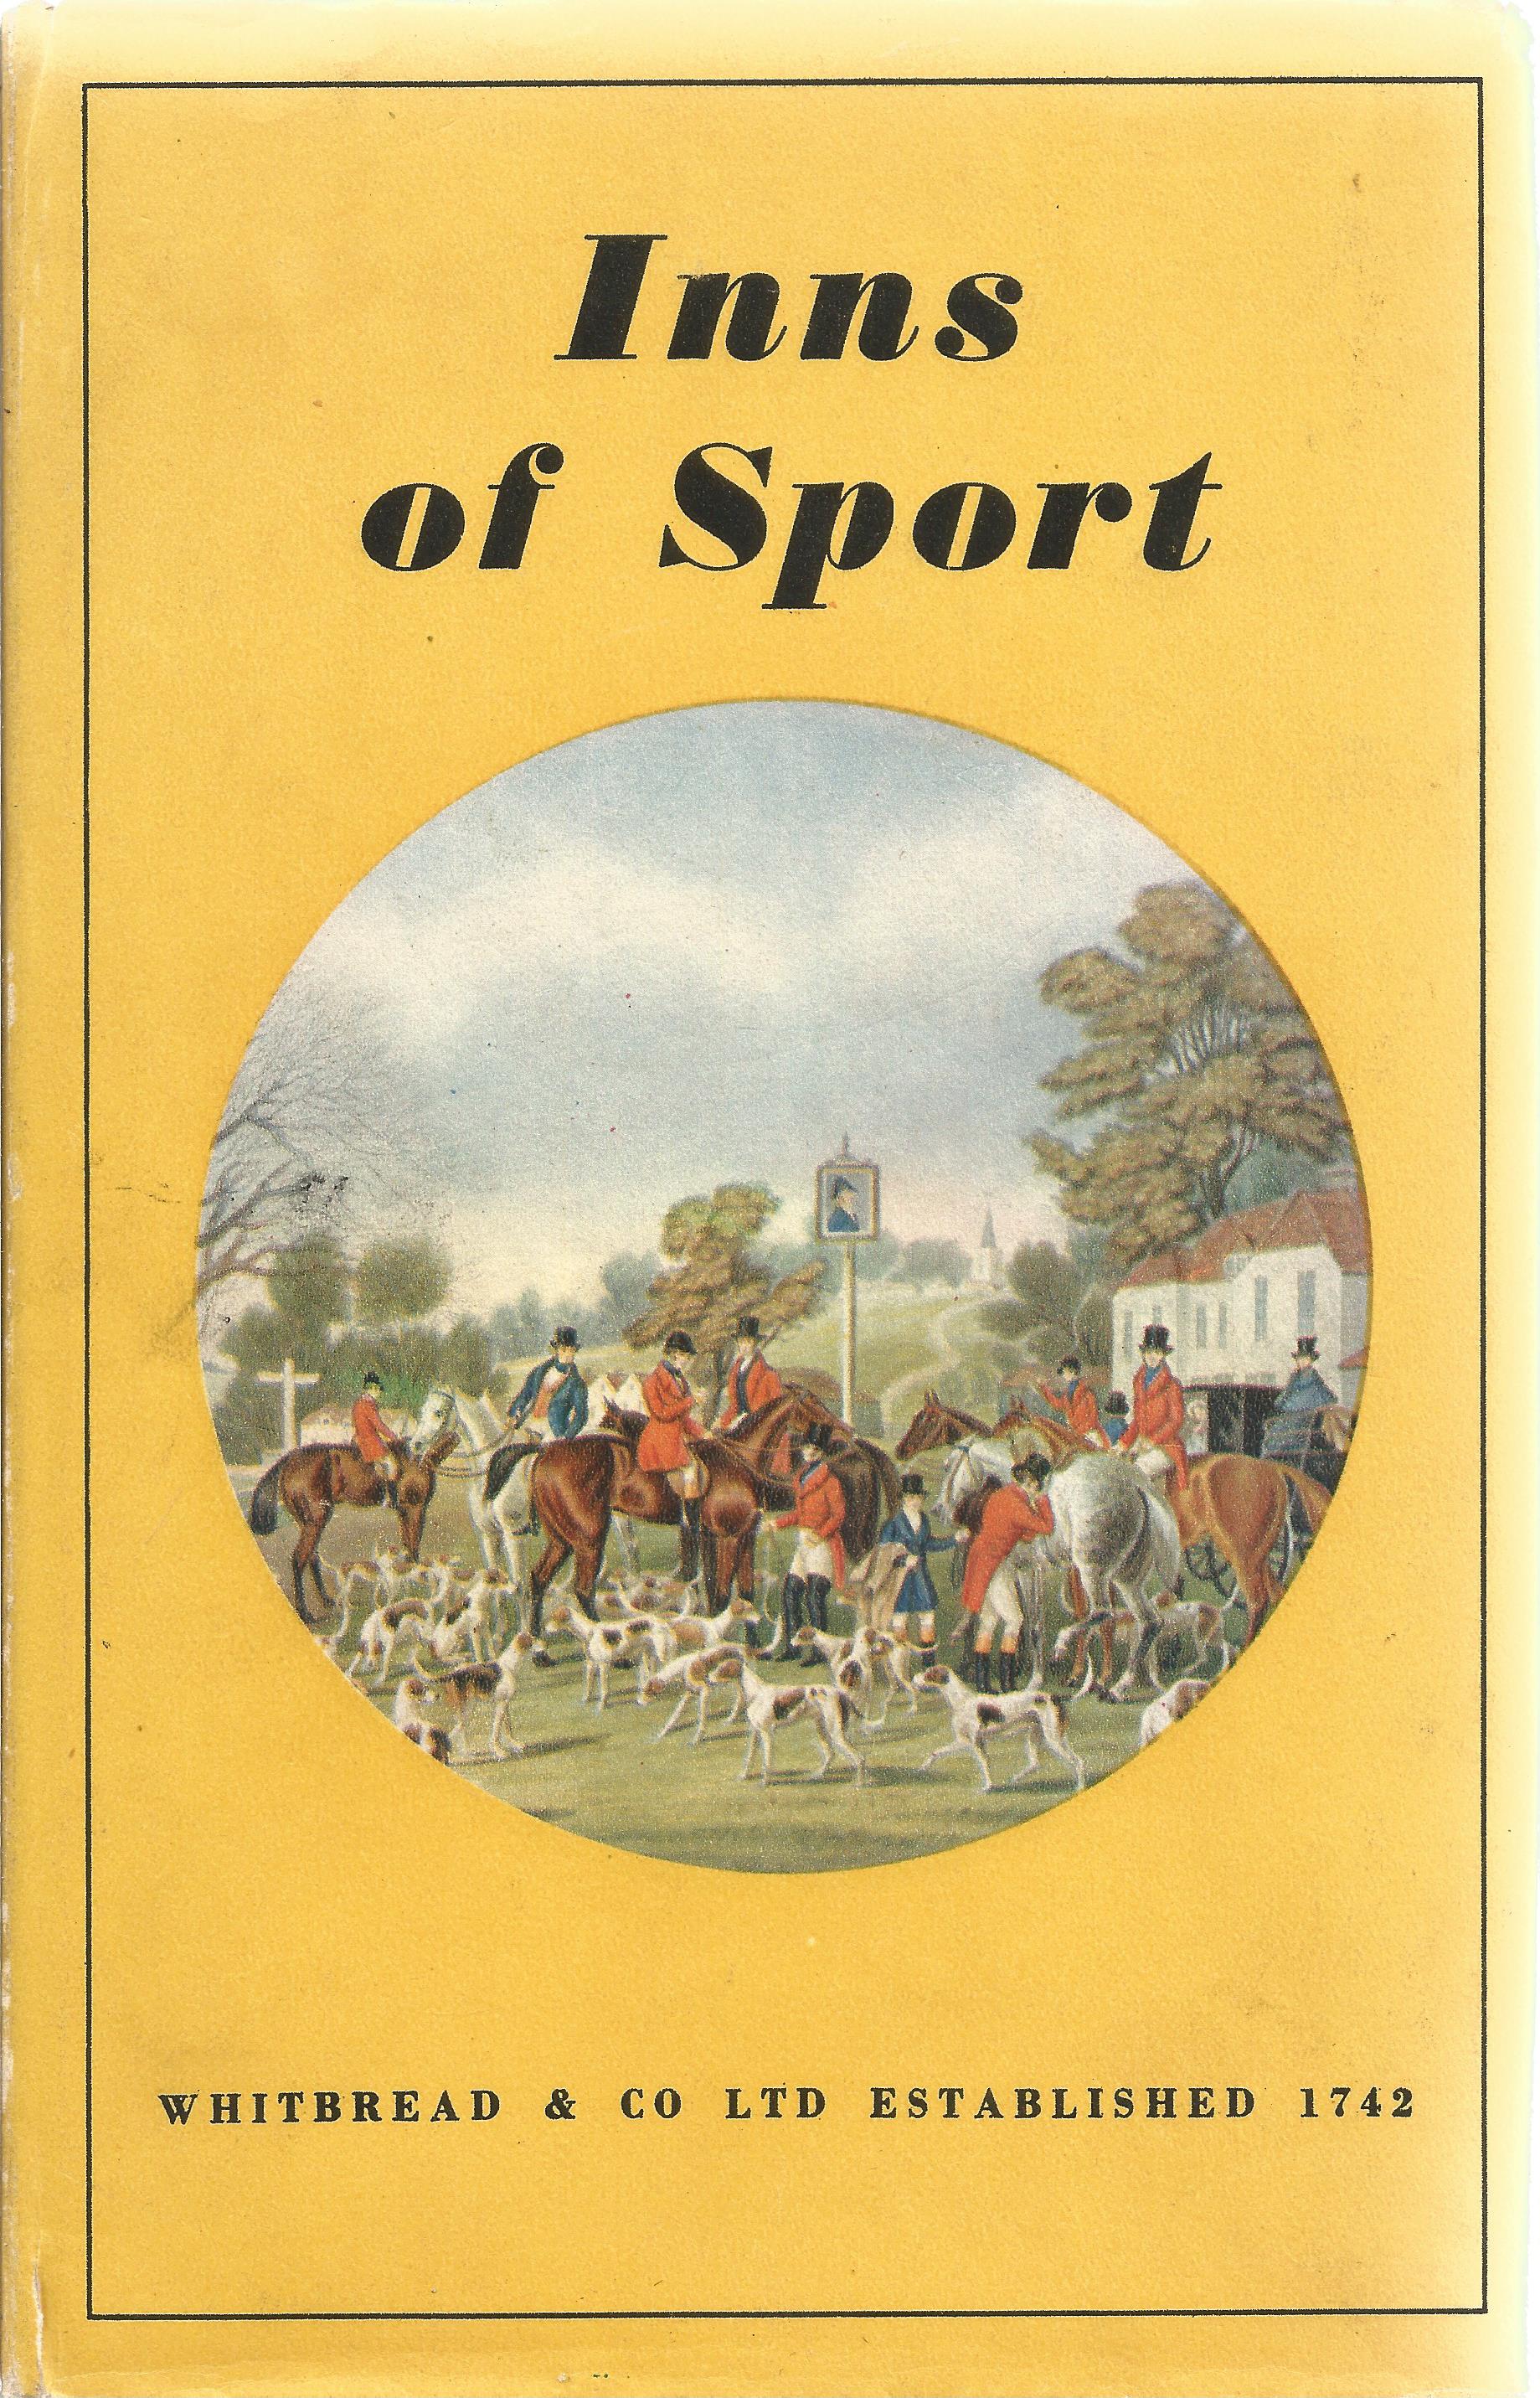 Inns of Sport by Whitbread and Co Ltd Hardback Book 1949 First Edition published by Whitbread and Co